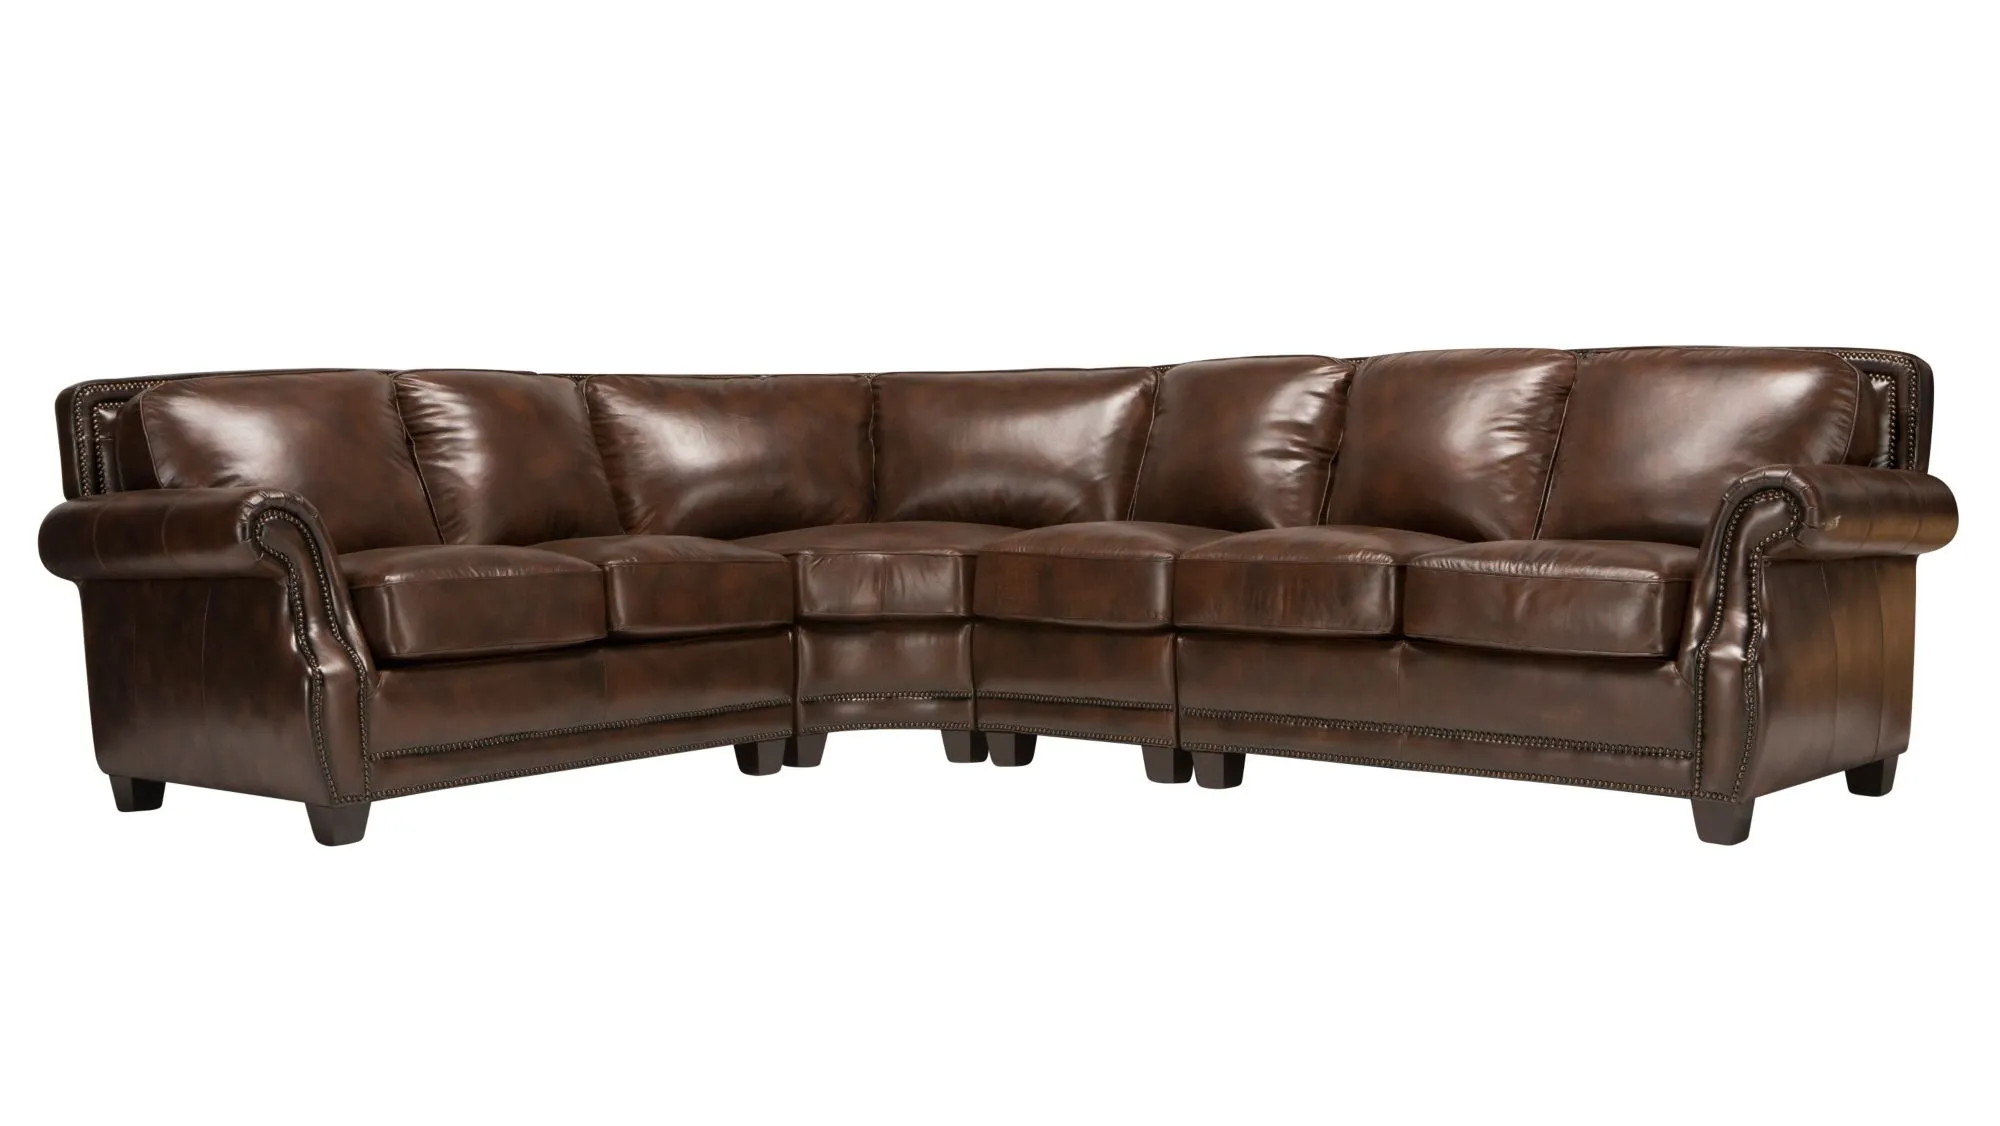 Romano 4-pc. Leather Sectional Sofa in Antique Tobacco by Bellanest